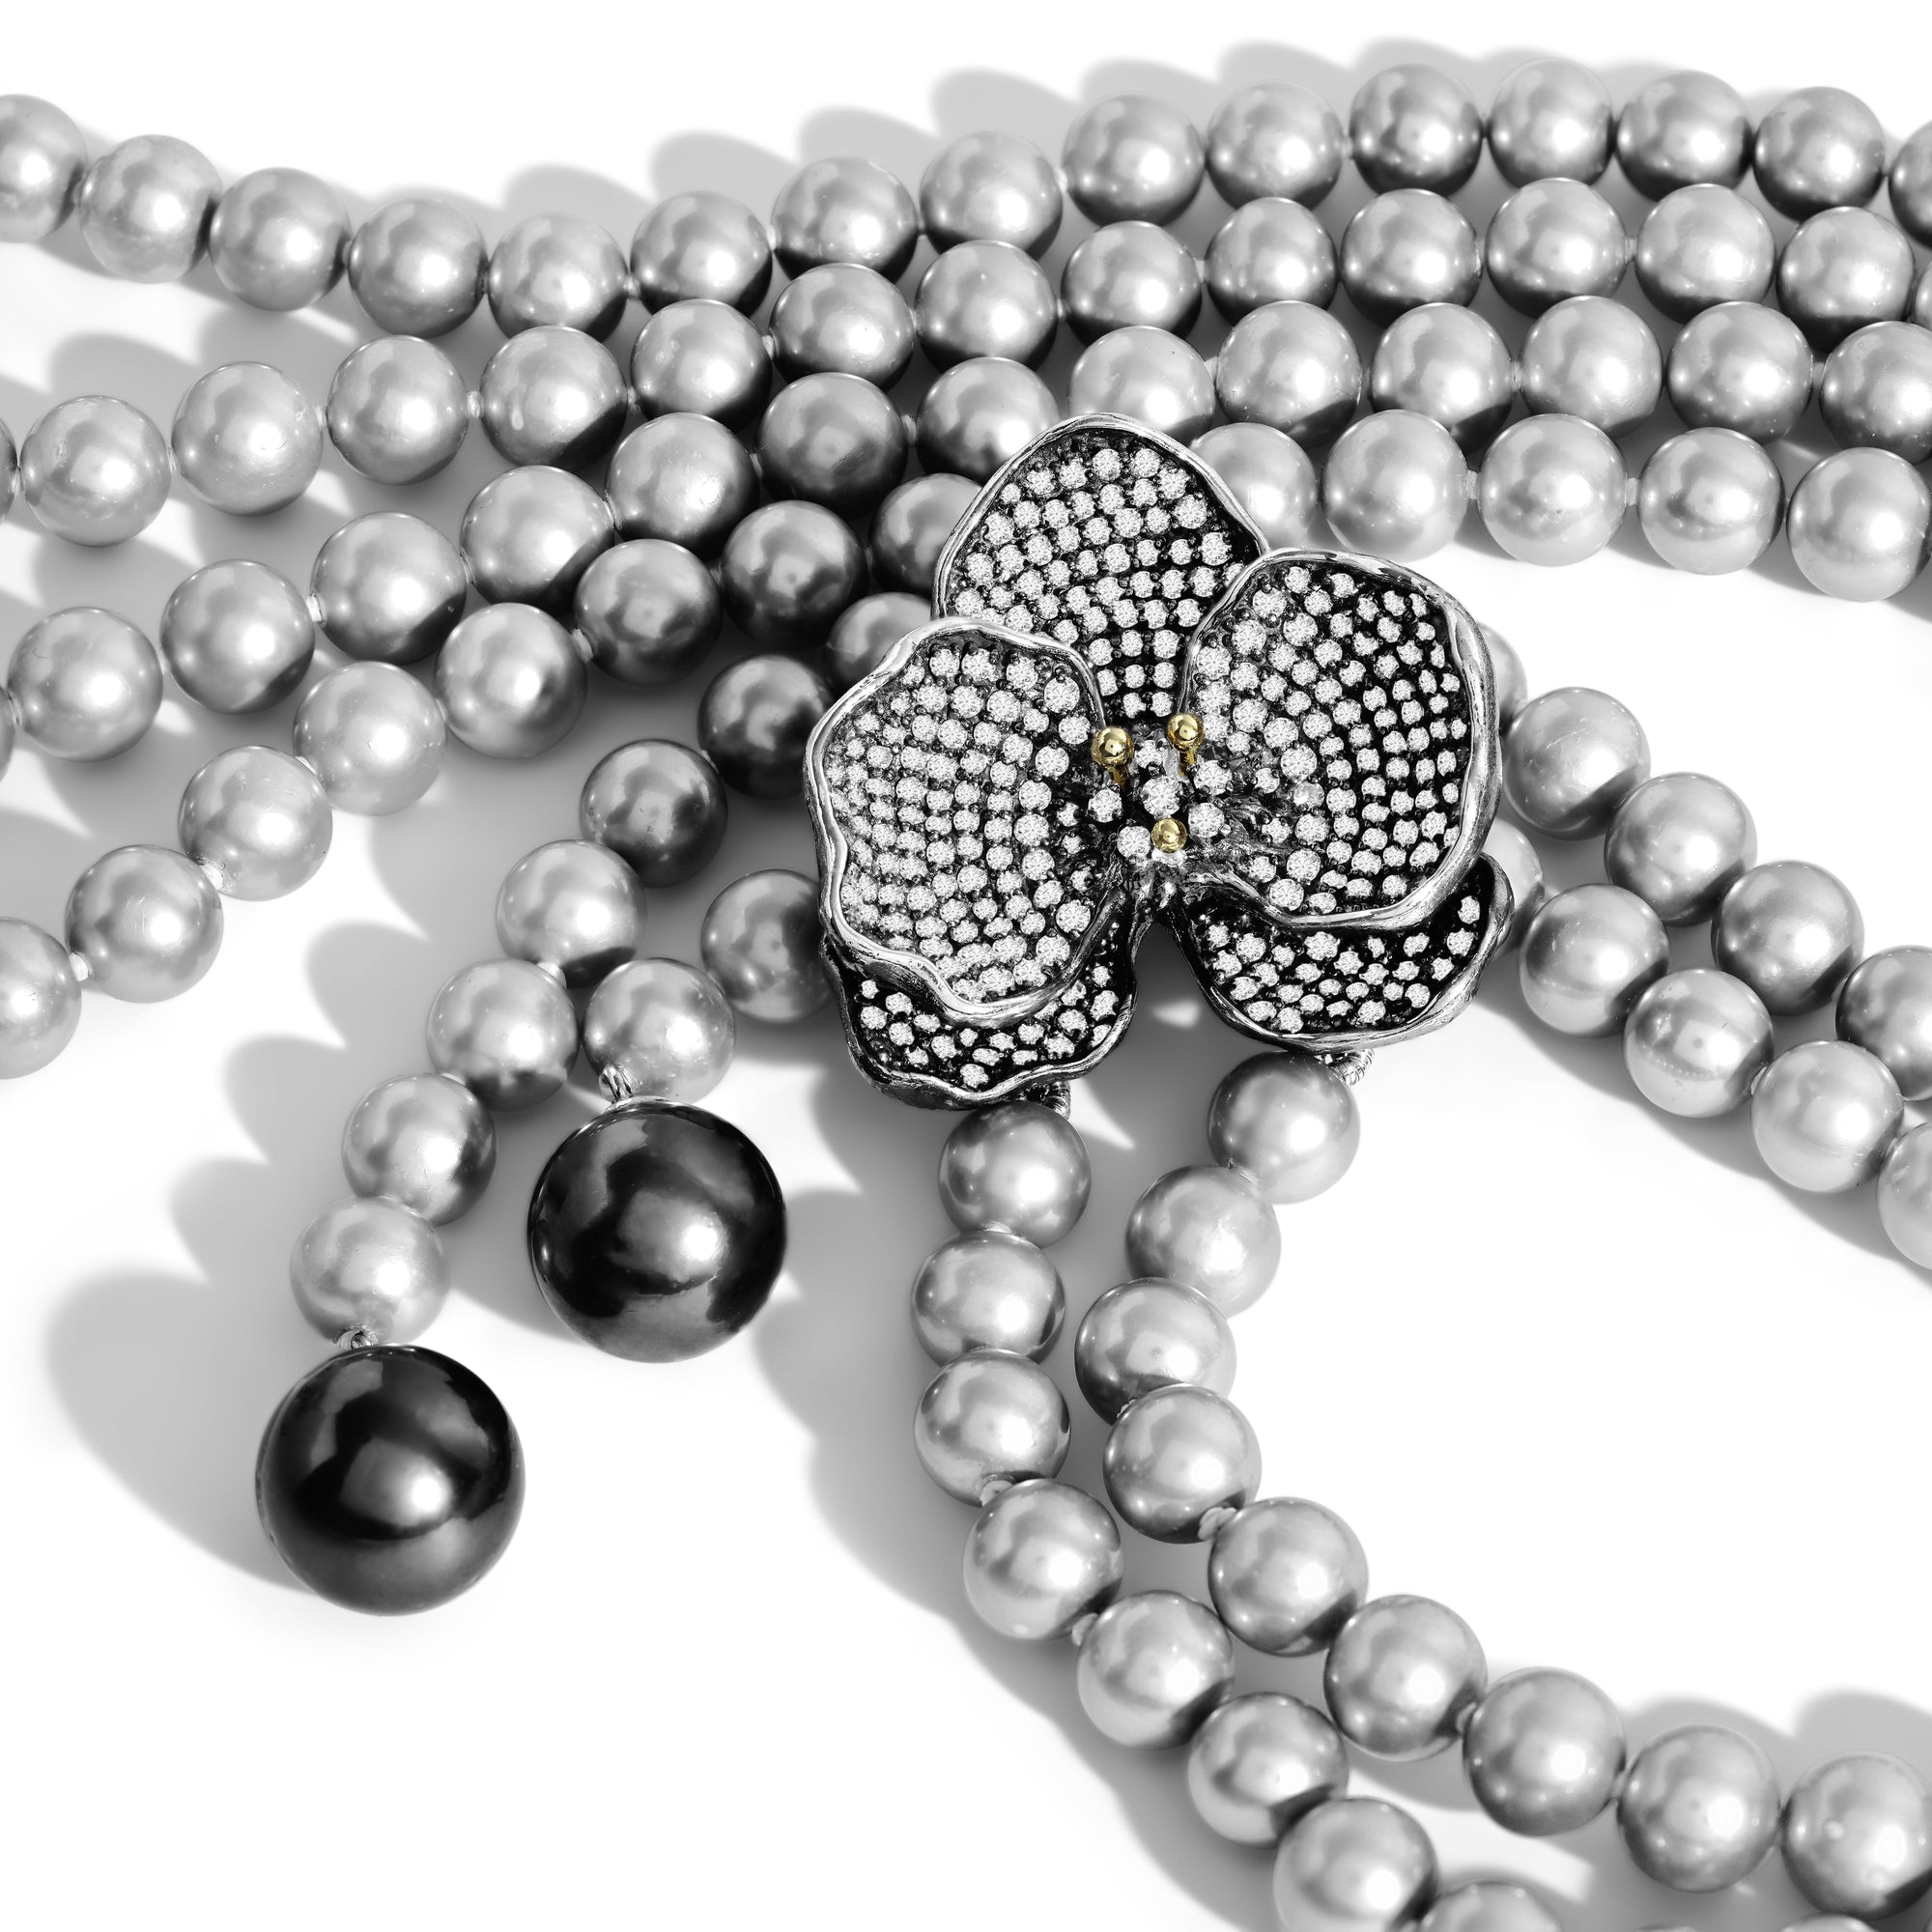 Michael Aram Orchid Lariat Necklace with Pearls and Diamonds